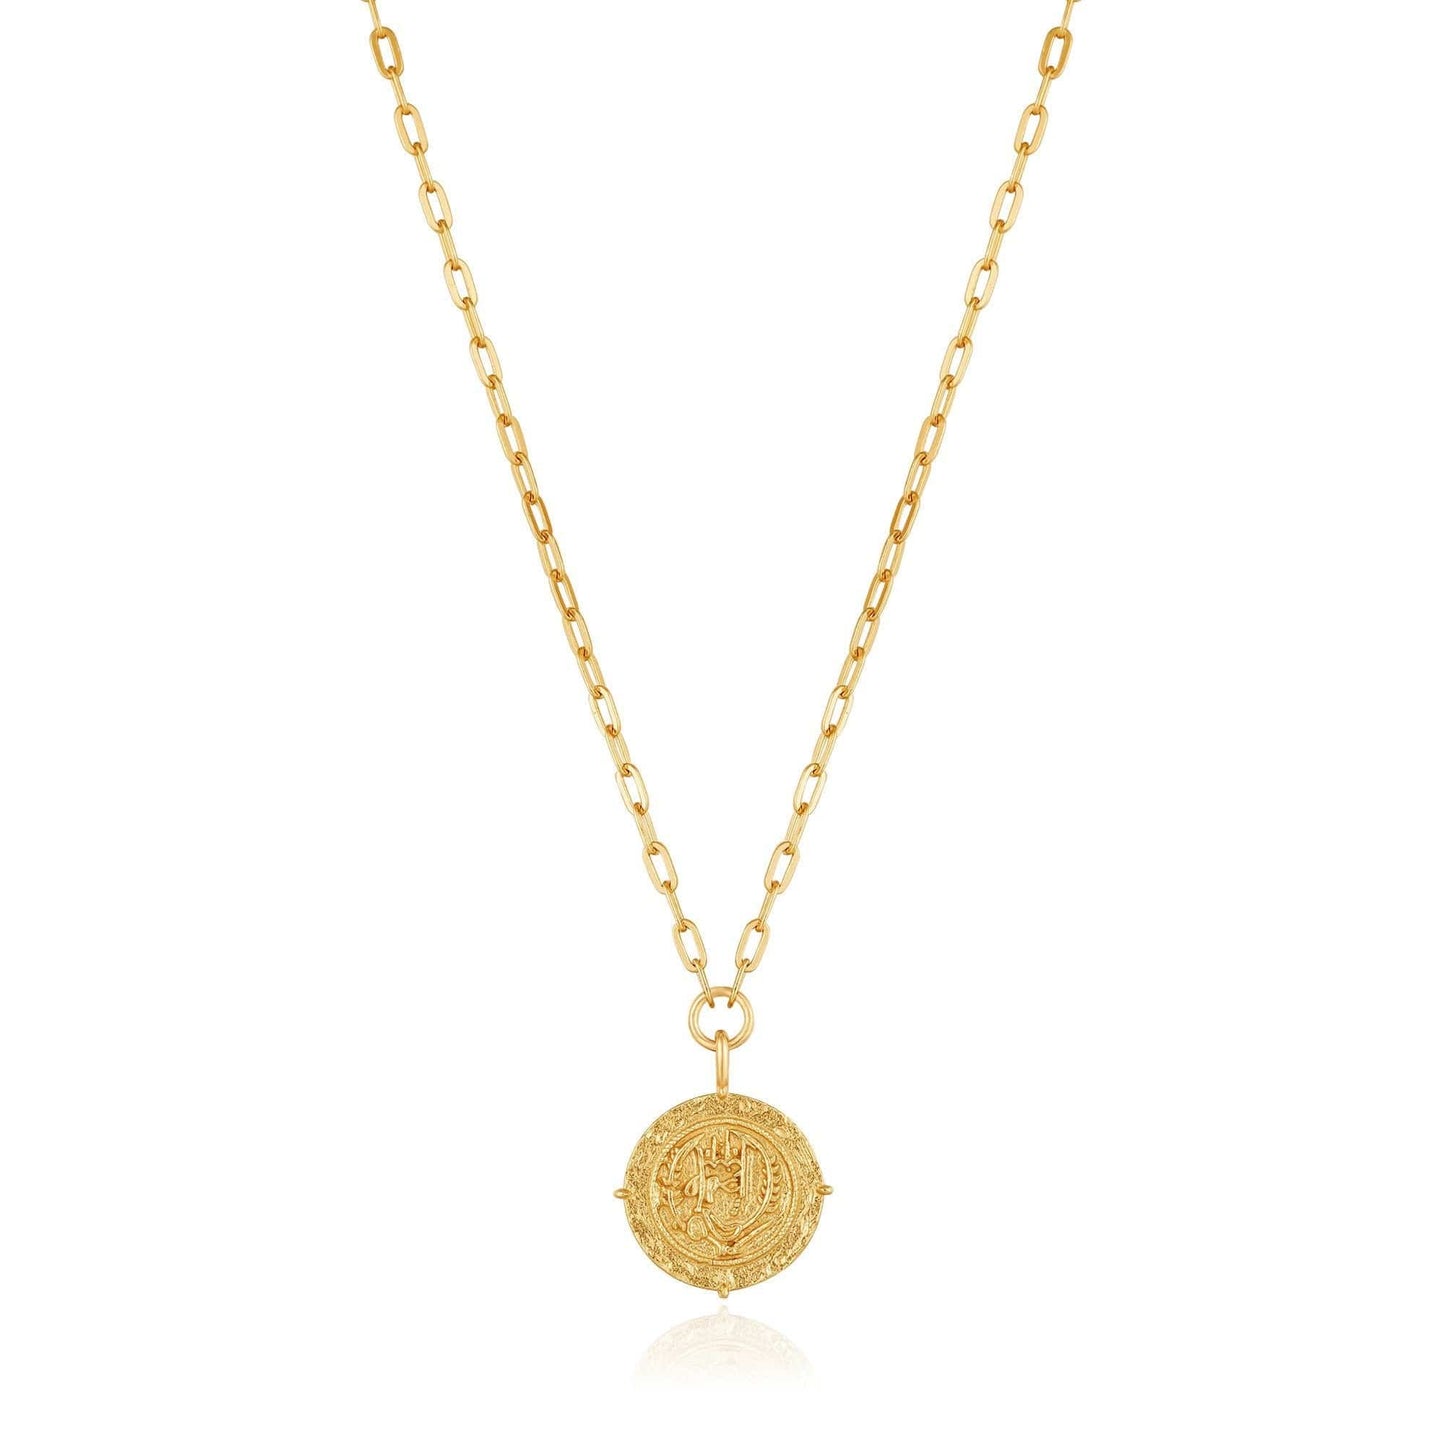 NKL-GPL Gold Axum Necklace